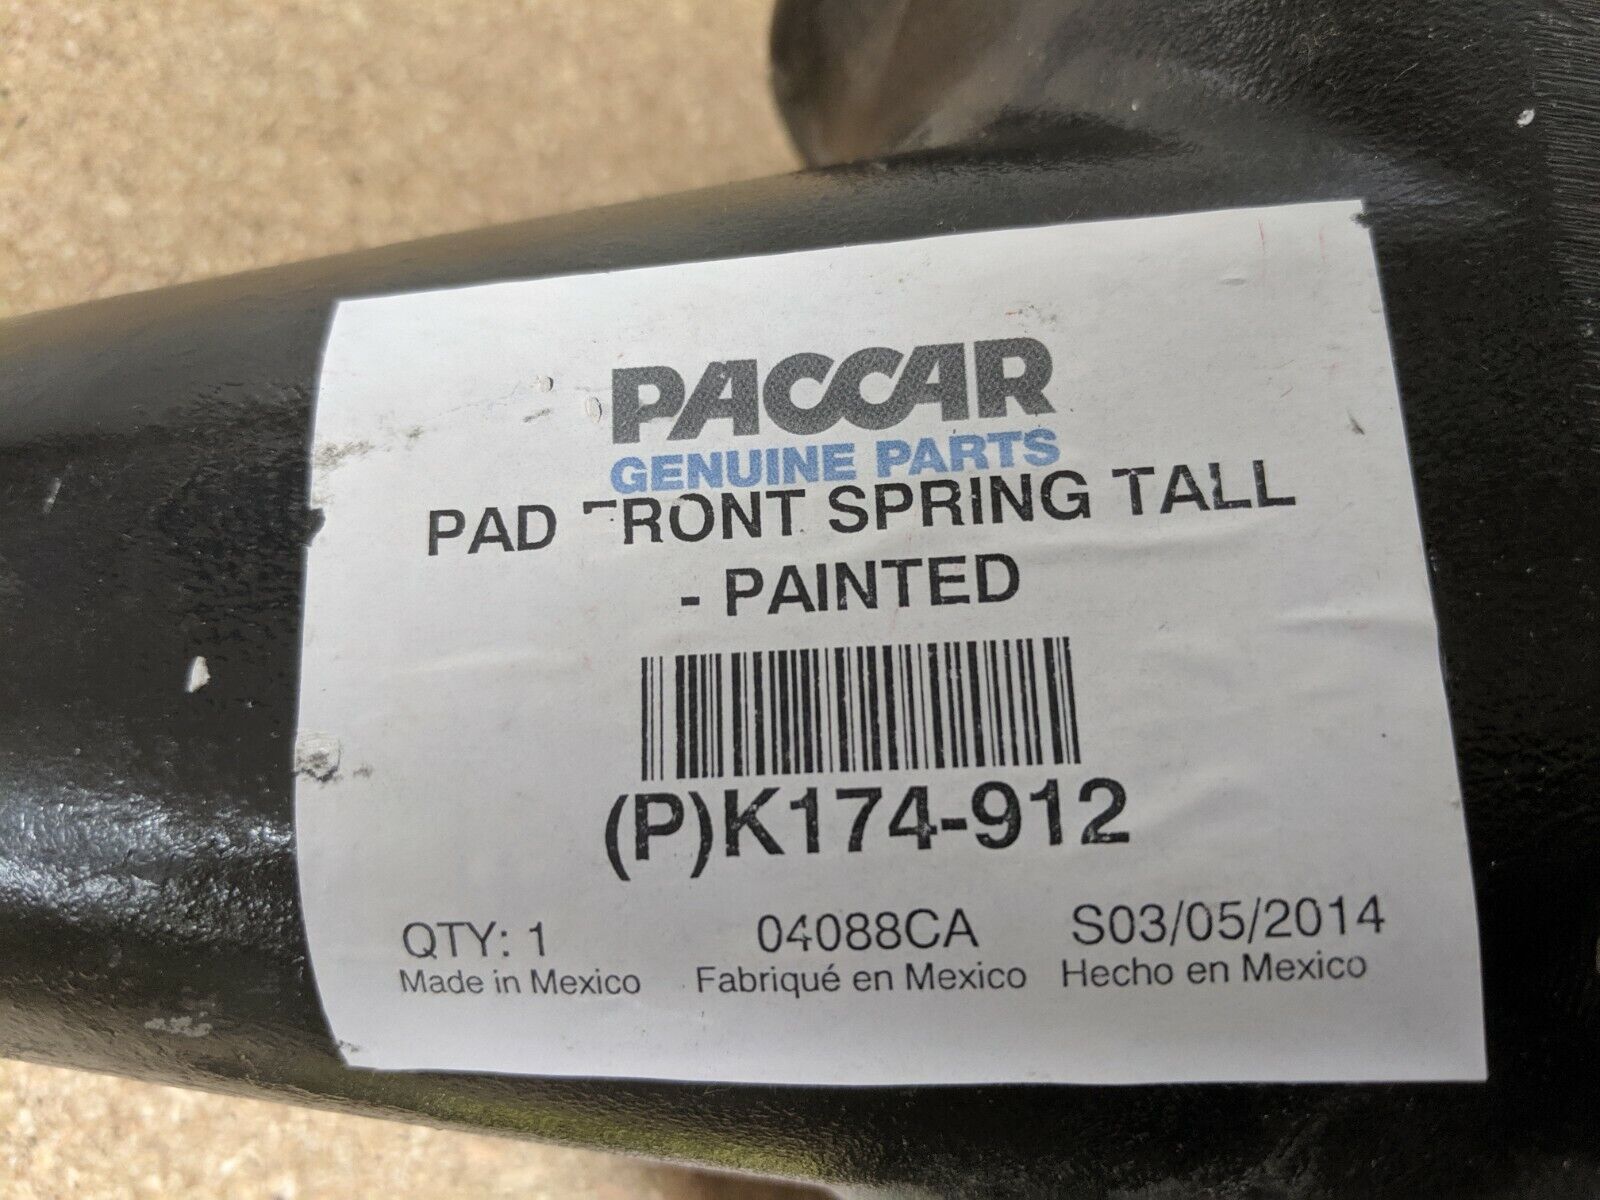 U-Bolt Top Plate Paccar # K174-912 Pad Spring Paint - Tall Front OFFer Dedication